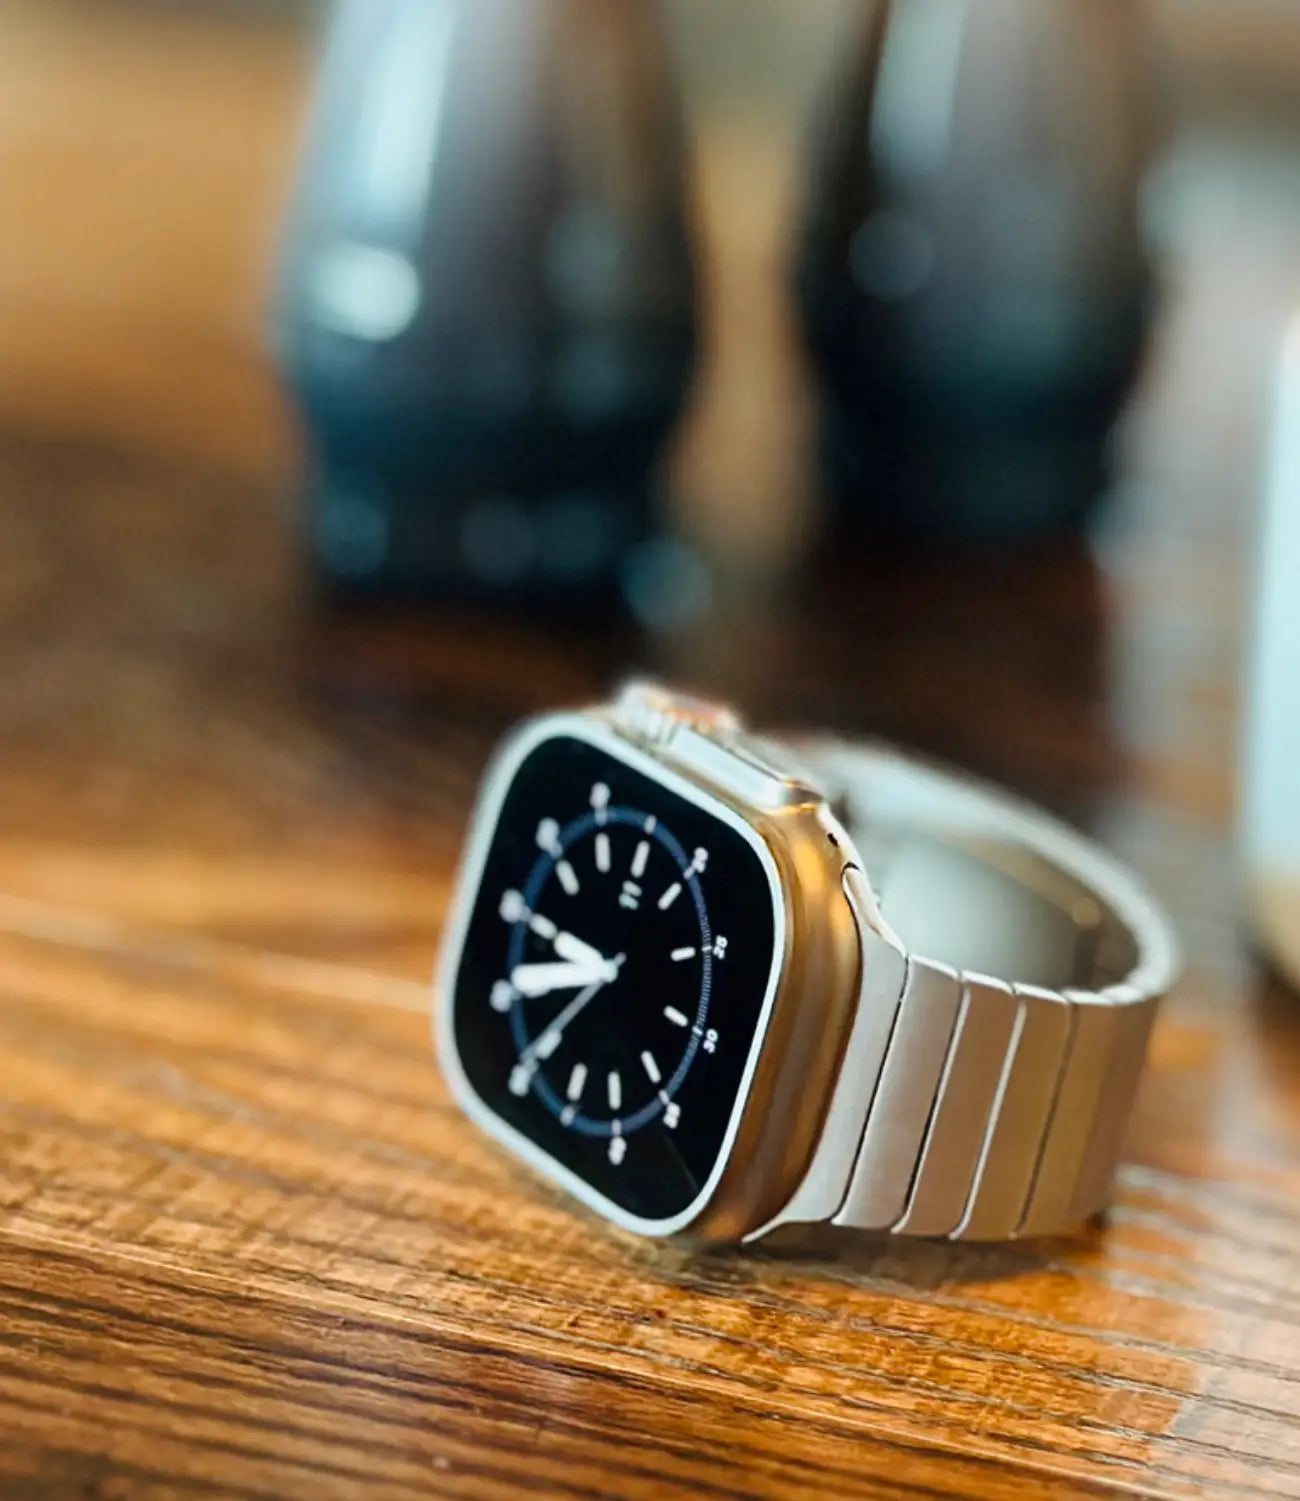 Hodinkees Apple Watch Ultra Review